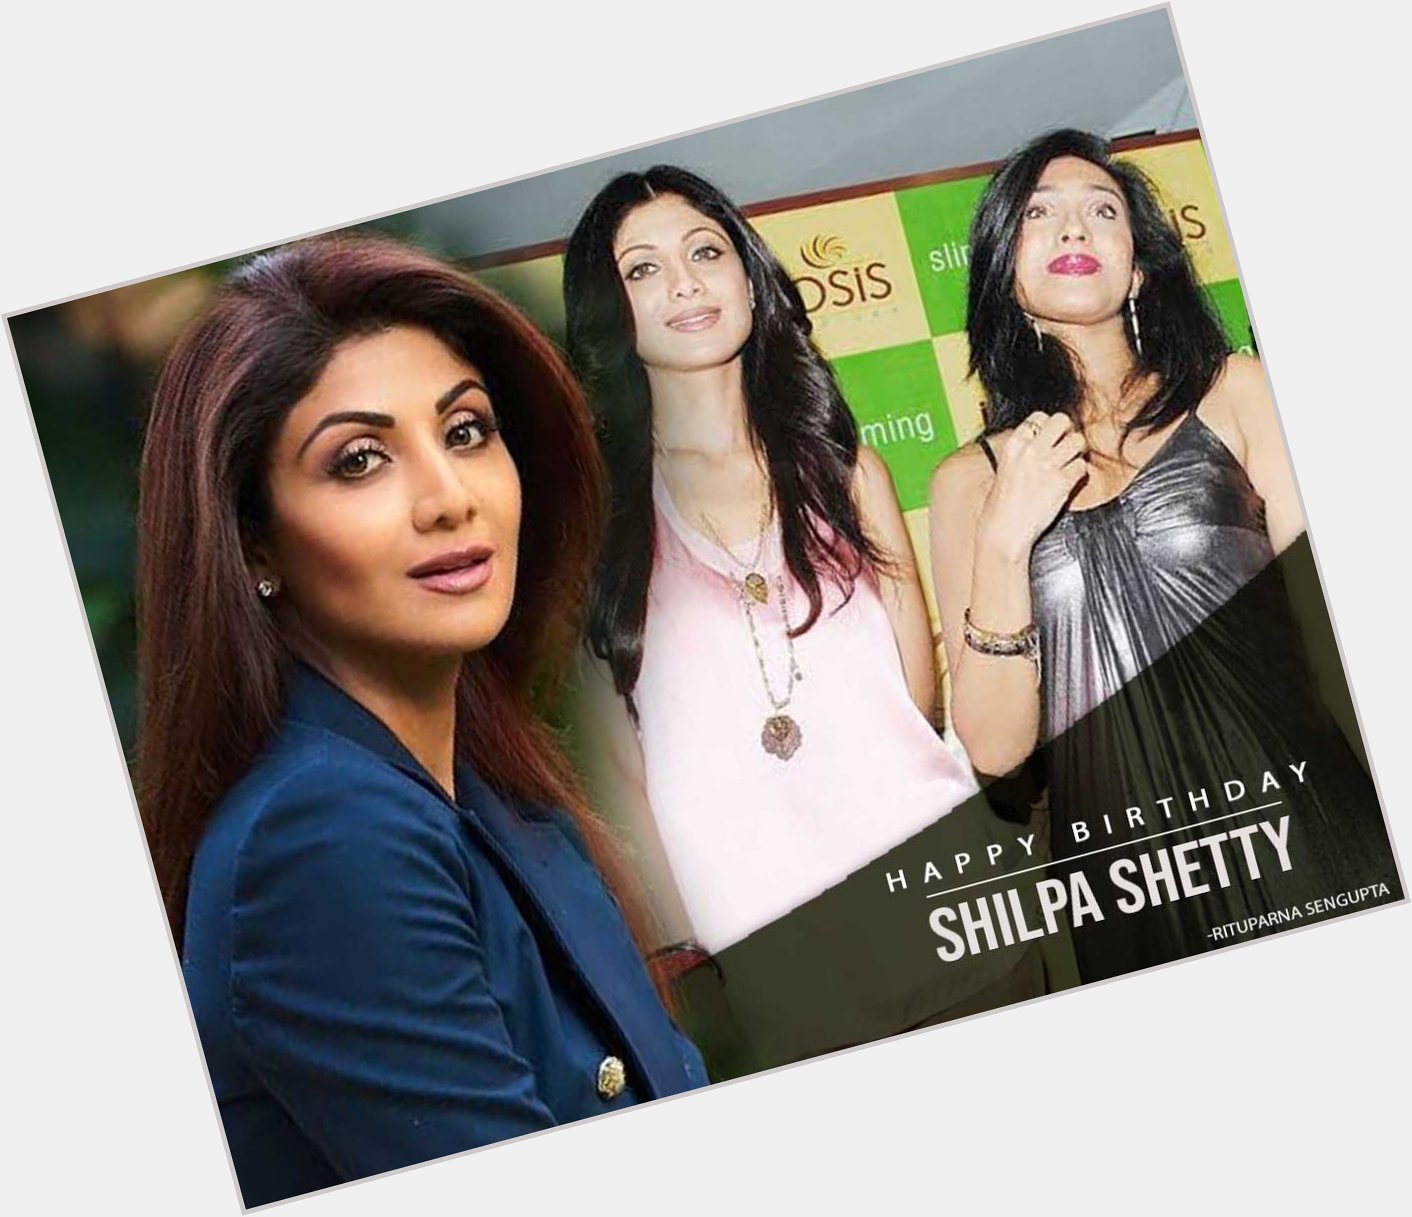 Wishing a very happy birthday to the galm queen, Shilpa Shetty!!! Keep shining & stay happy   